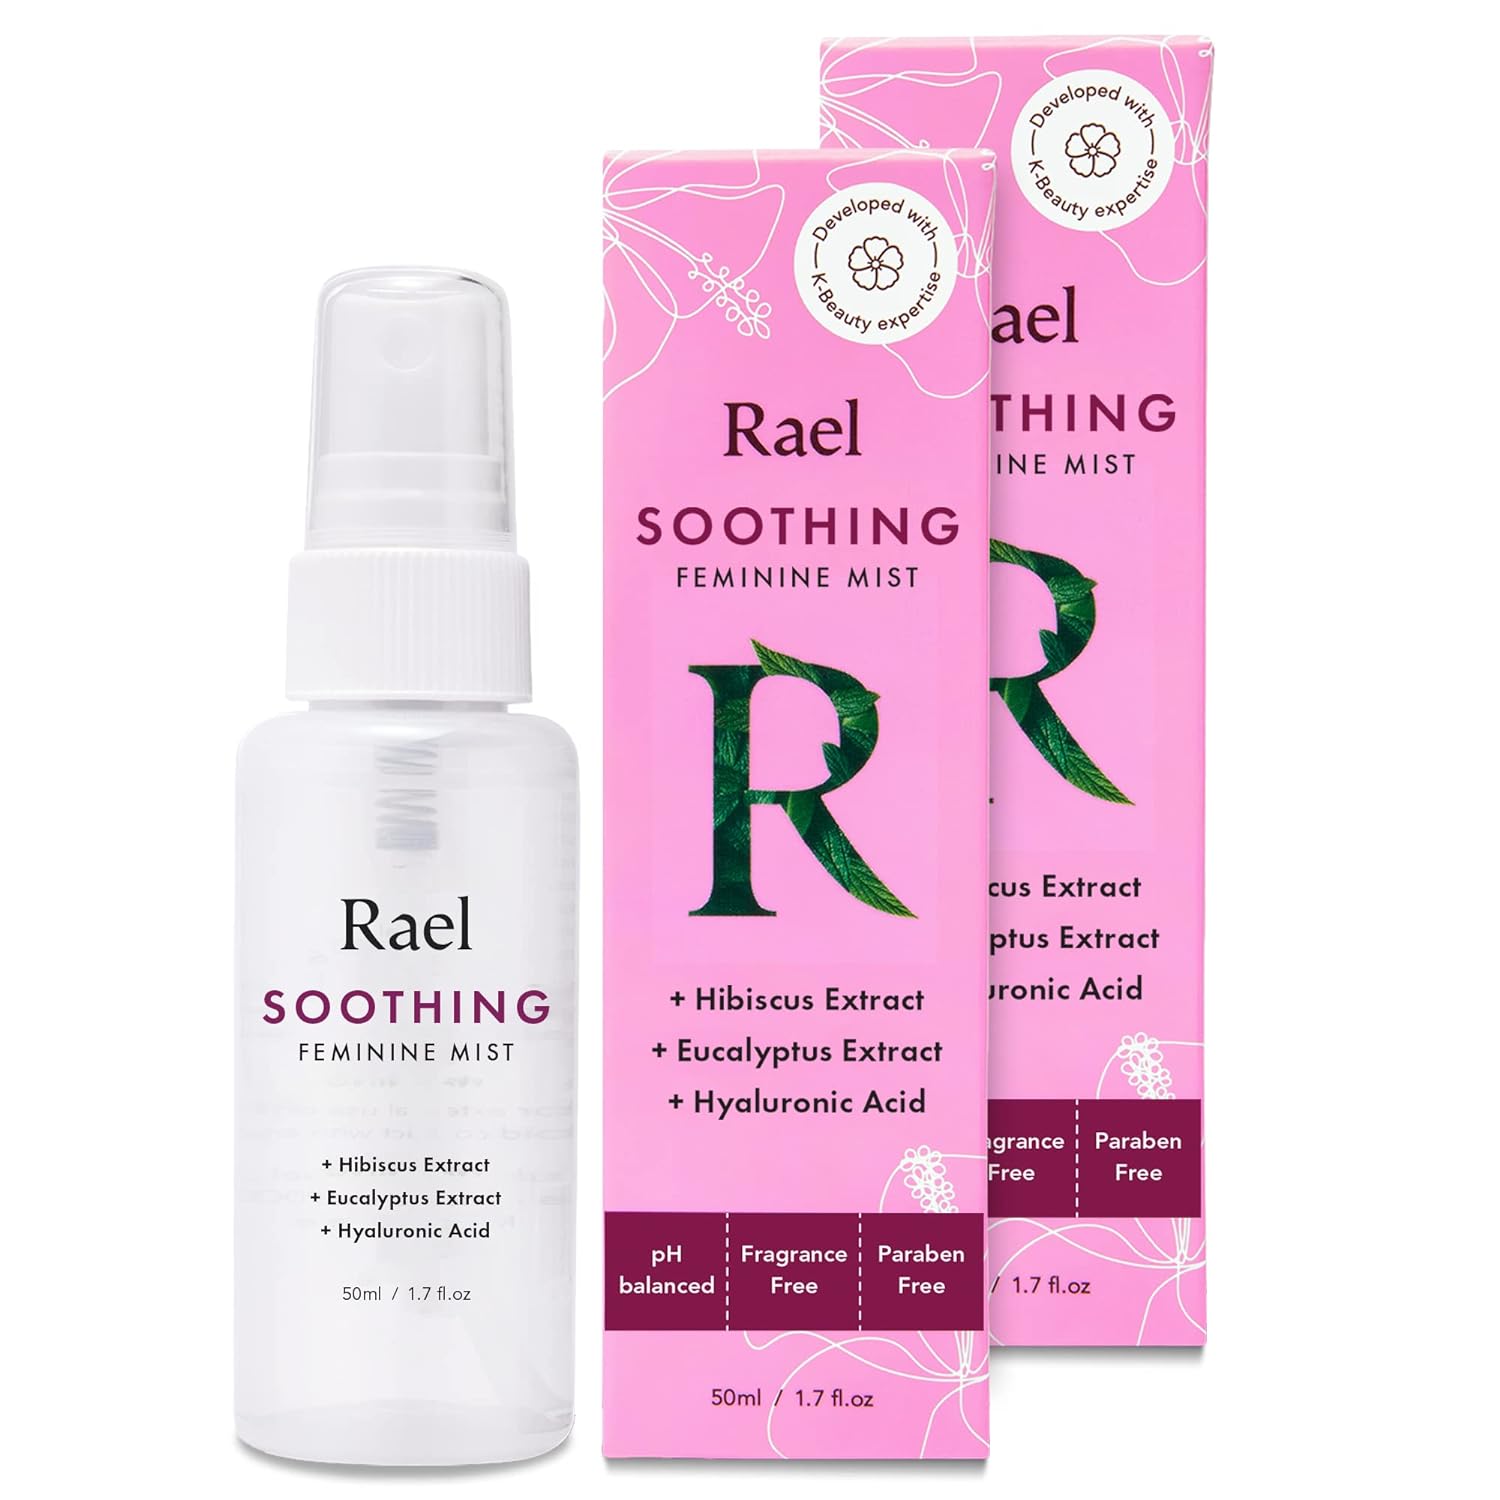 Rael Feminine Spray, Soothing Mist - pH Balance, Intimate Spray for Women, Unscented, On The Go, Clean Ingredients, Irritation & Odor Care (1.7 Fl Oz, Pack of 2)